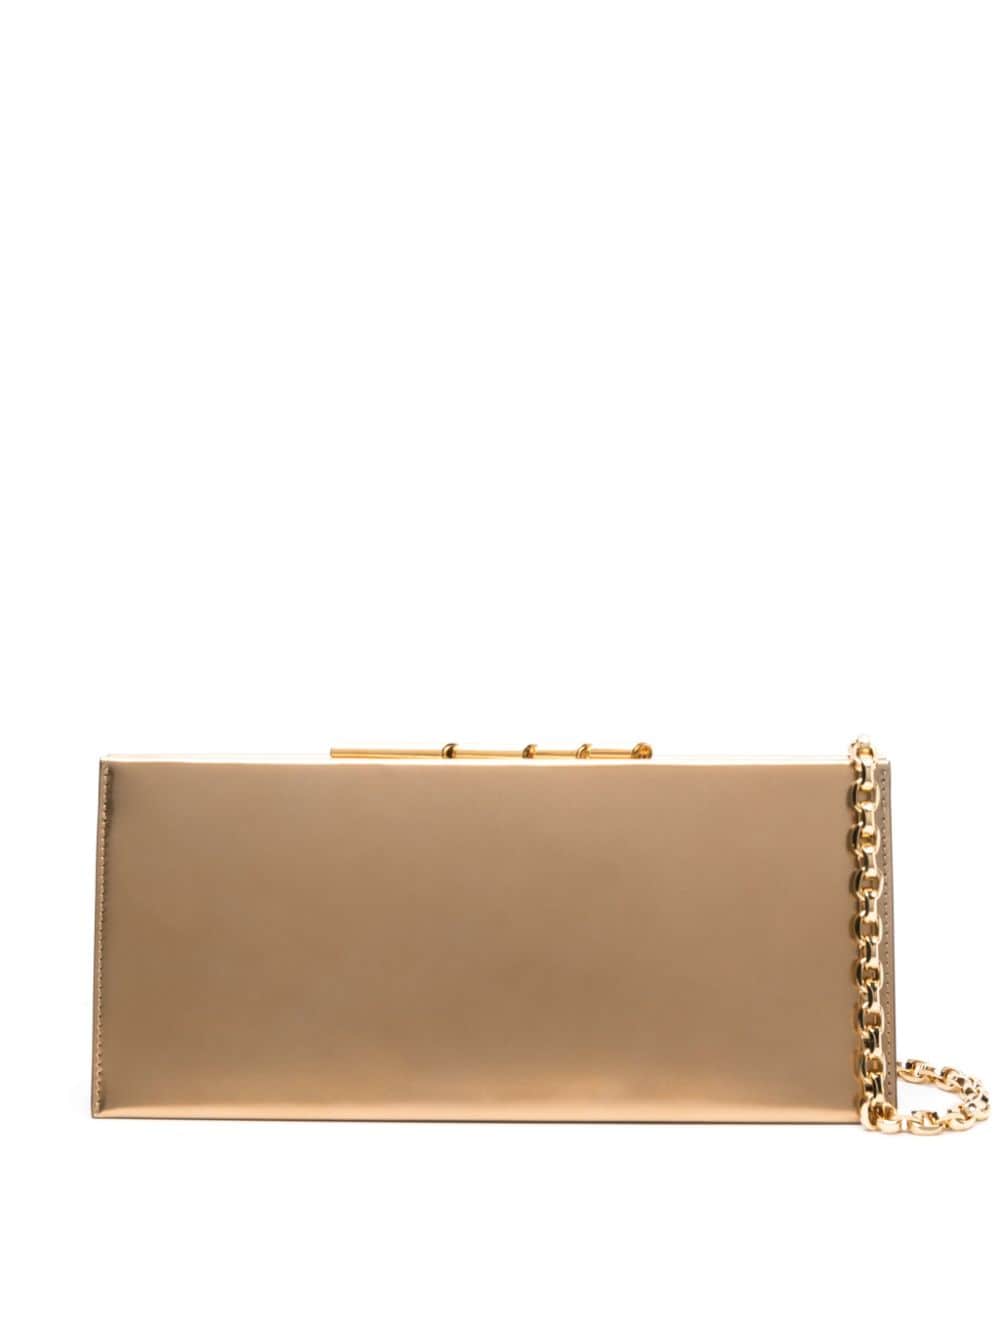 Lanvin Sequence Metallic Leather Clutch Bag In Gold